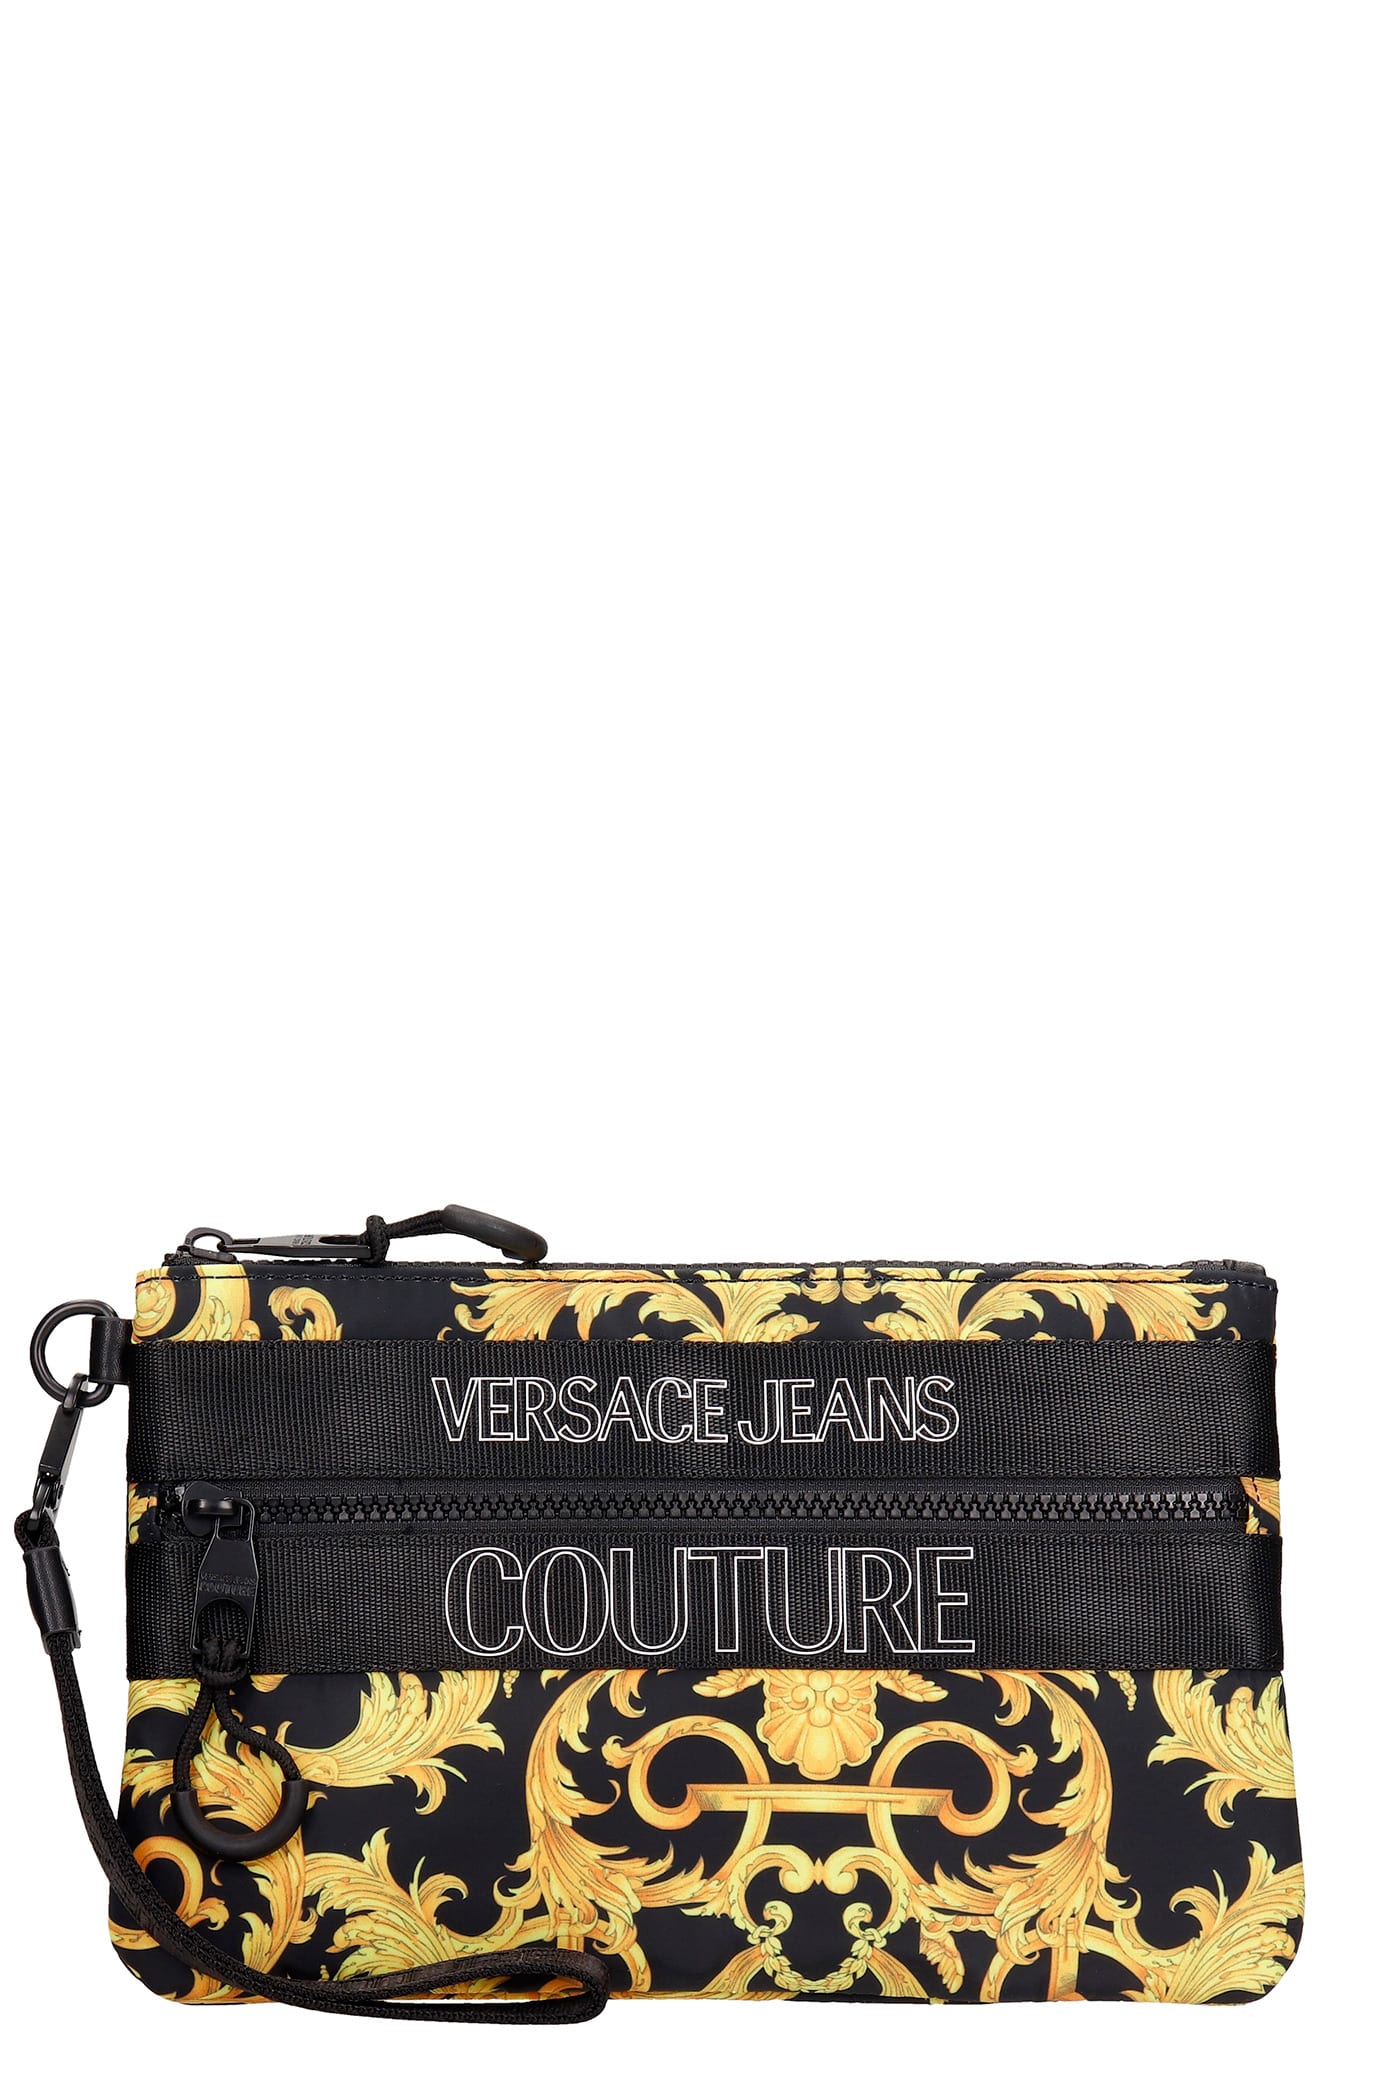 Versace Jeans Couture Clutch In Black Polyester